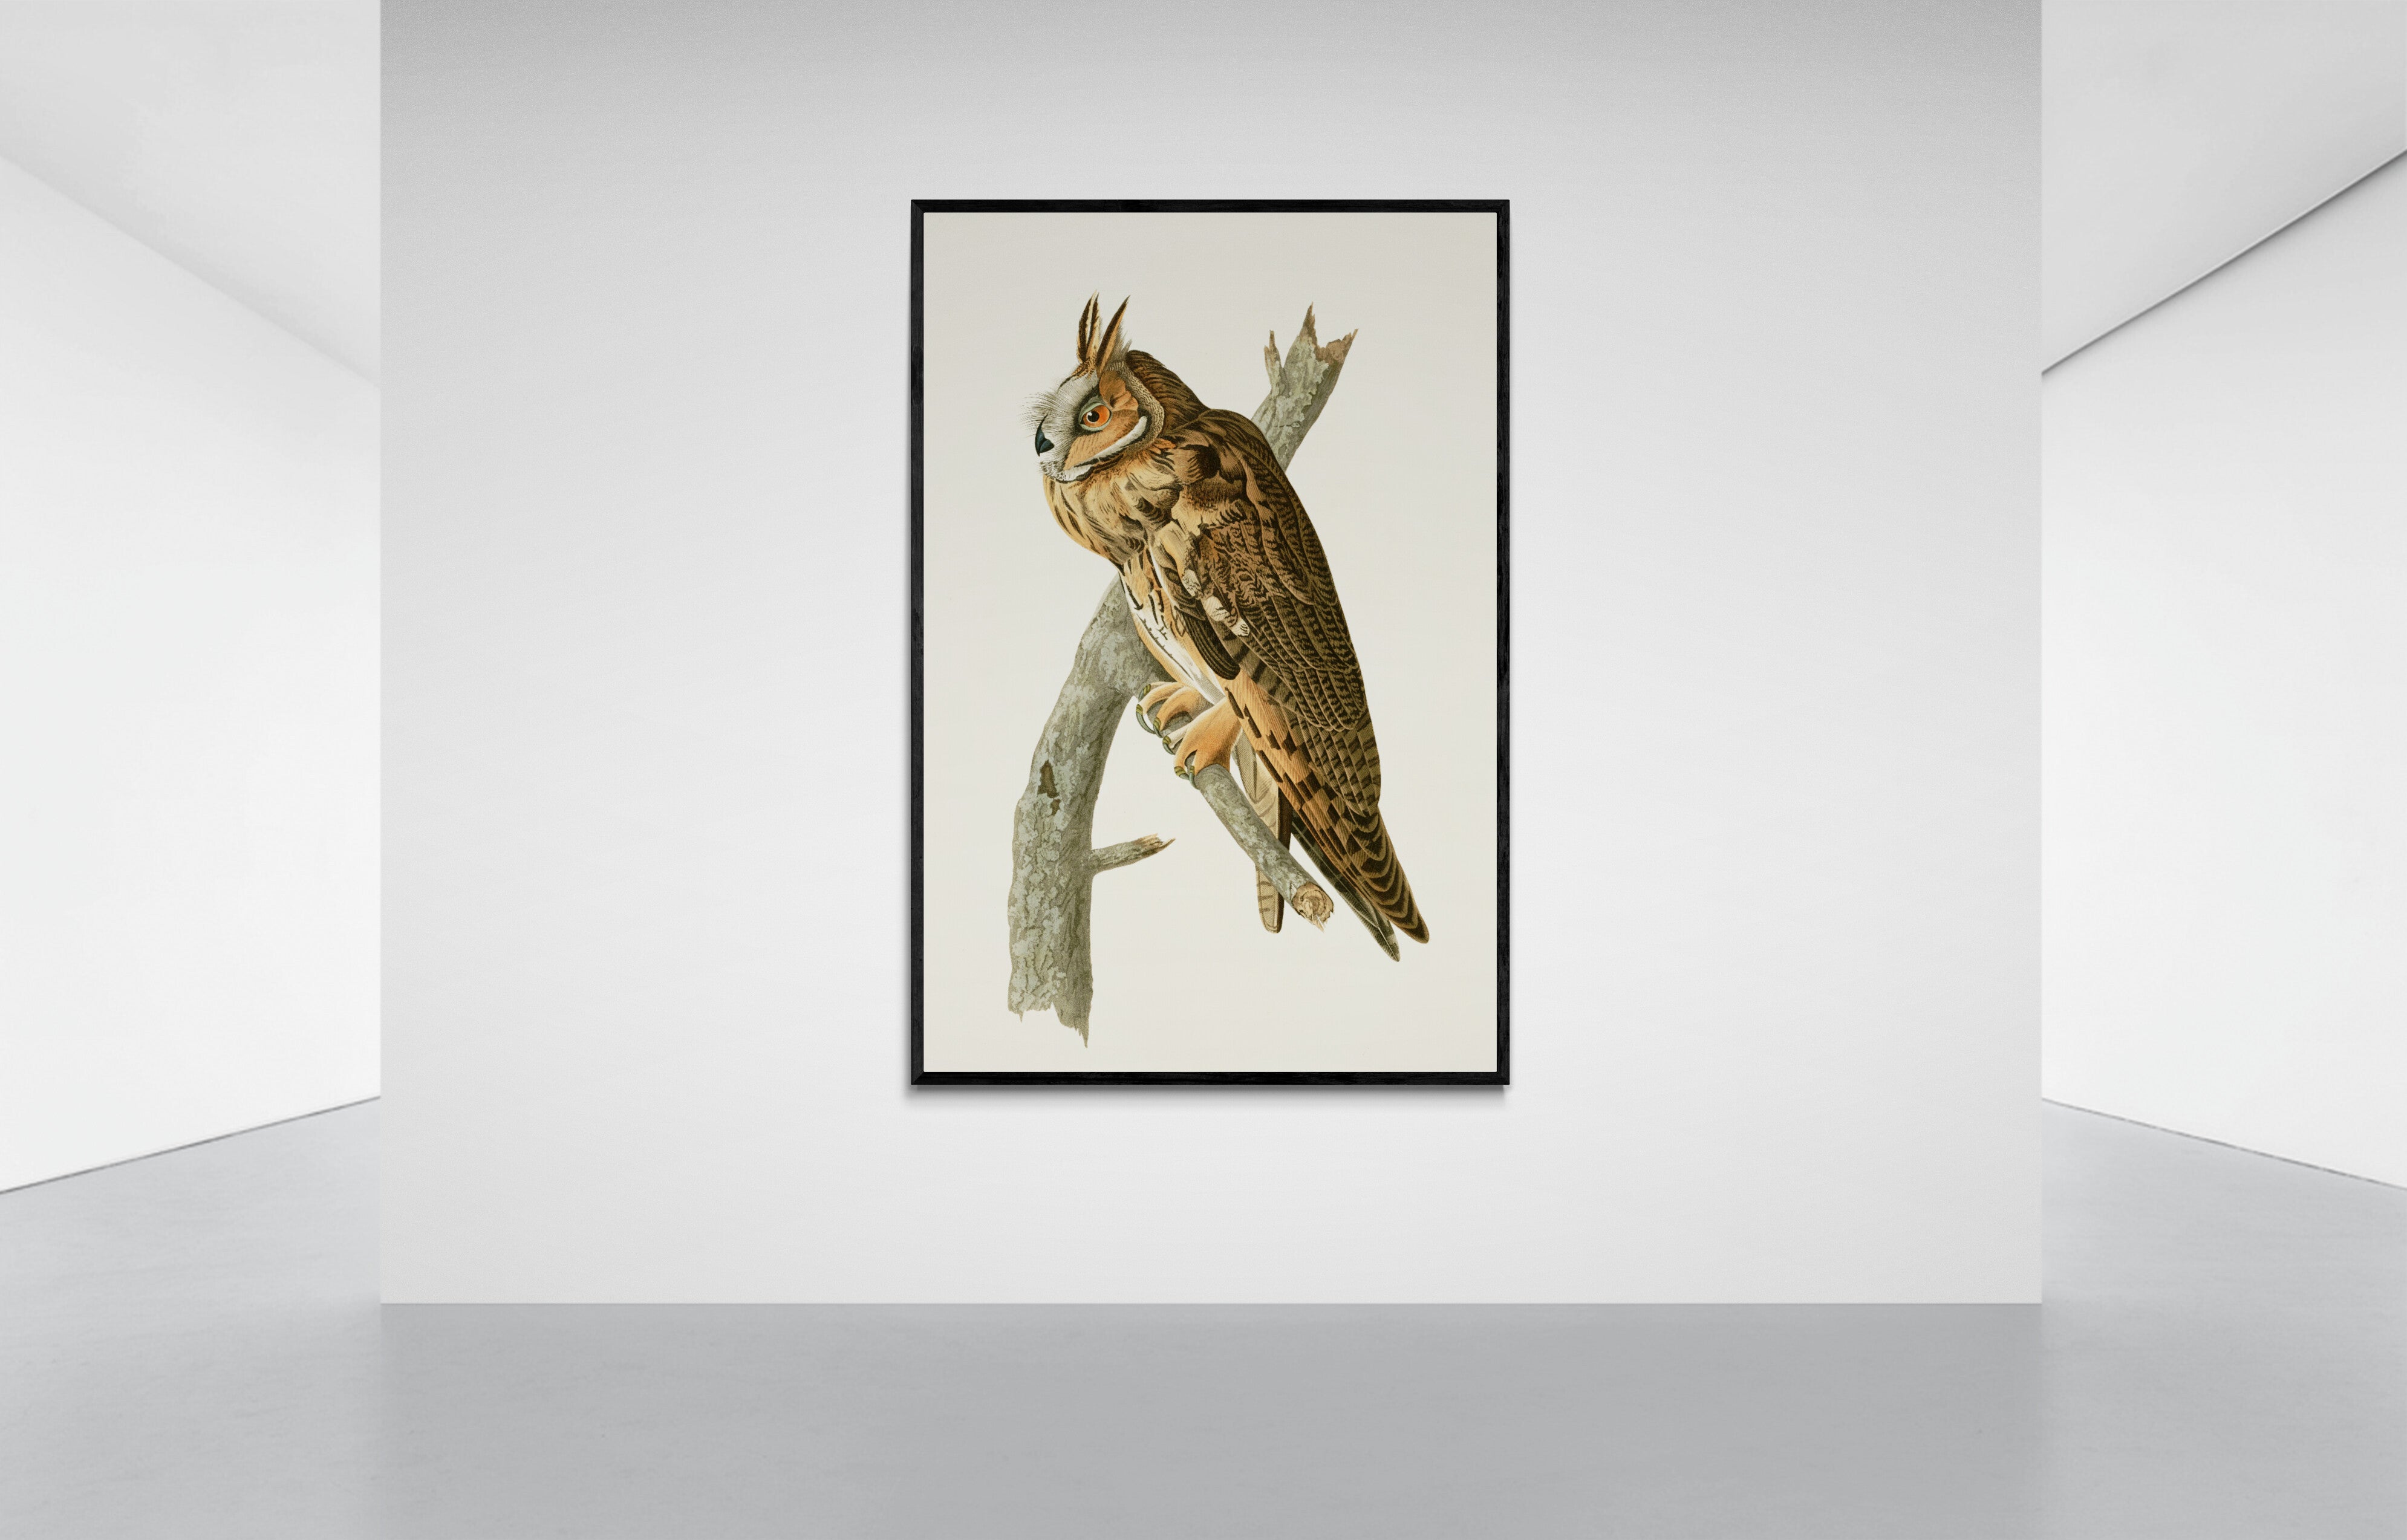 Vintage naturalistic bird illustrations: Long-eared Owl. Prints on art paper, canvas, and framed canvas. Free shipping in the USA. SKUJJA084